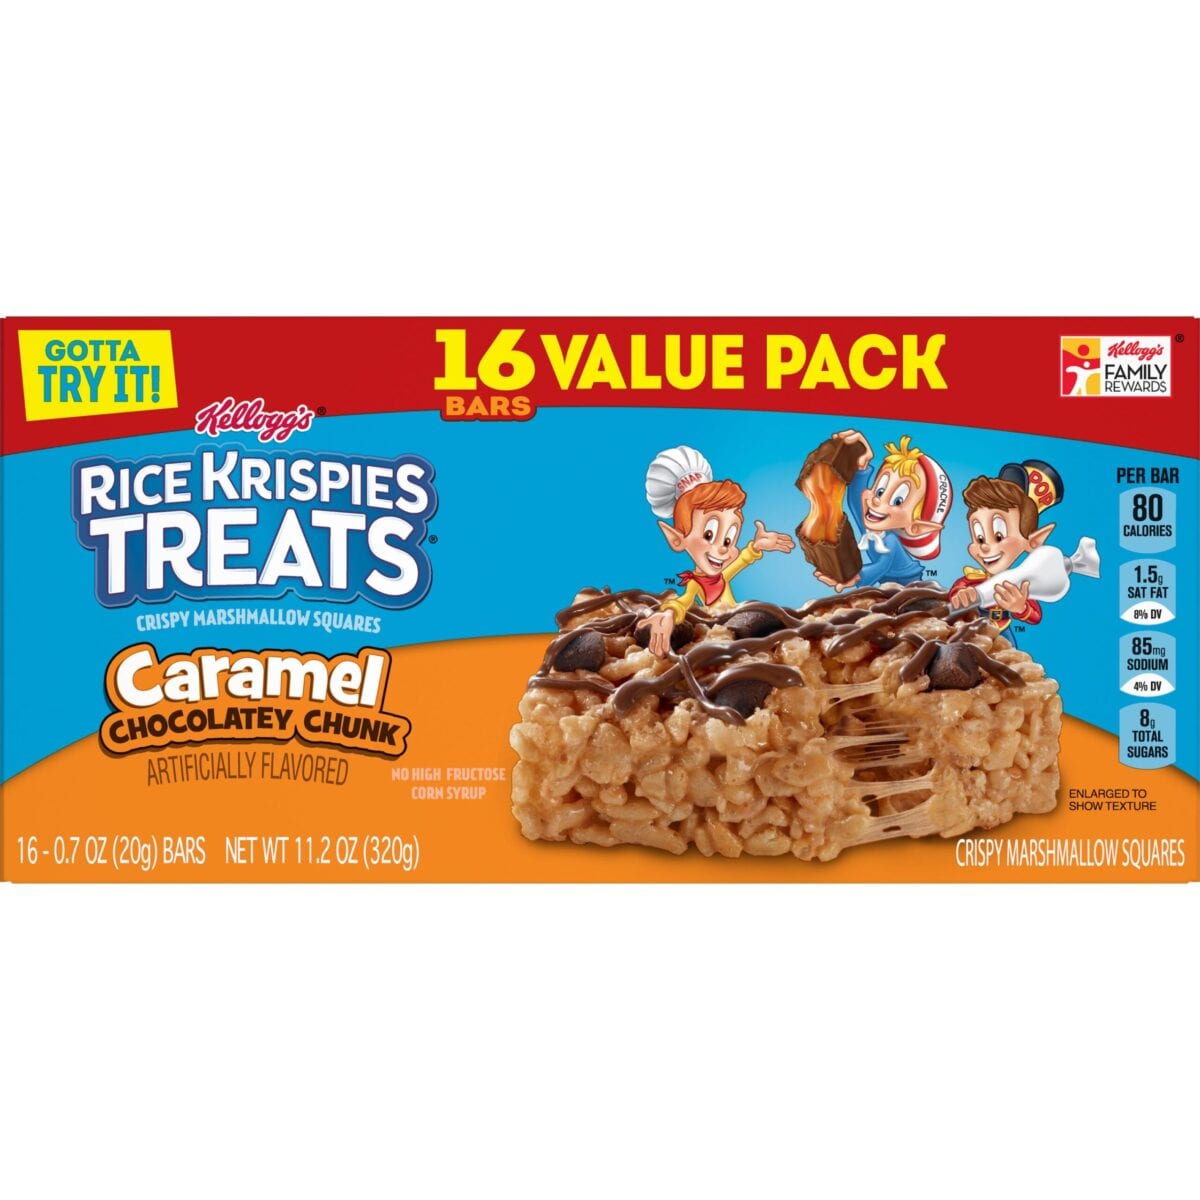 You Can Now Get Rice Krispies Treats Stuffed With Caramel and Chocolate Chunks and I Need Some